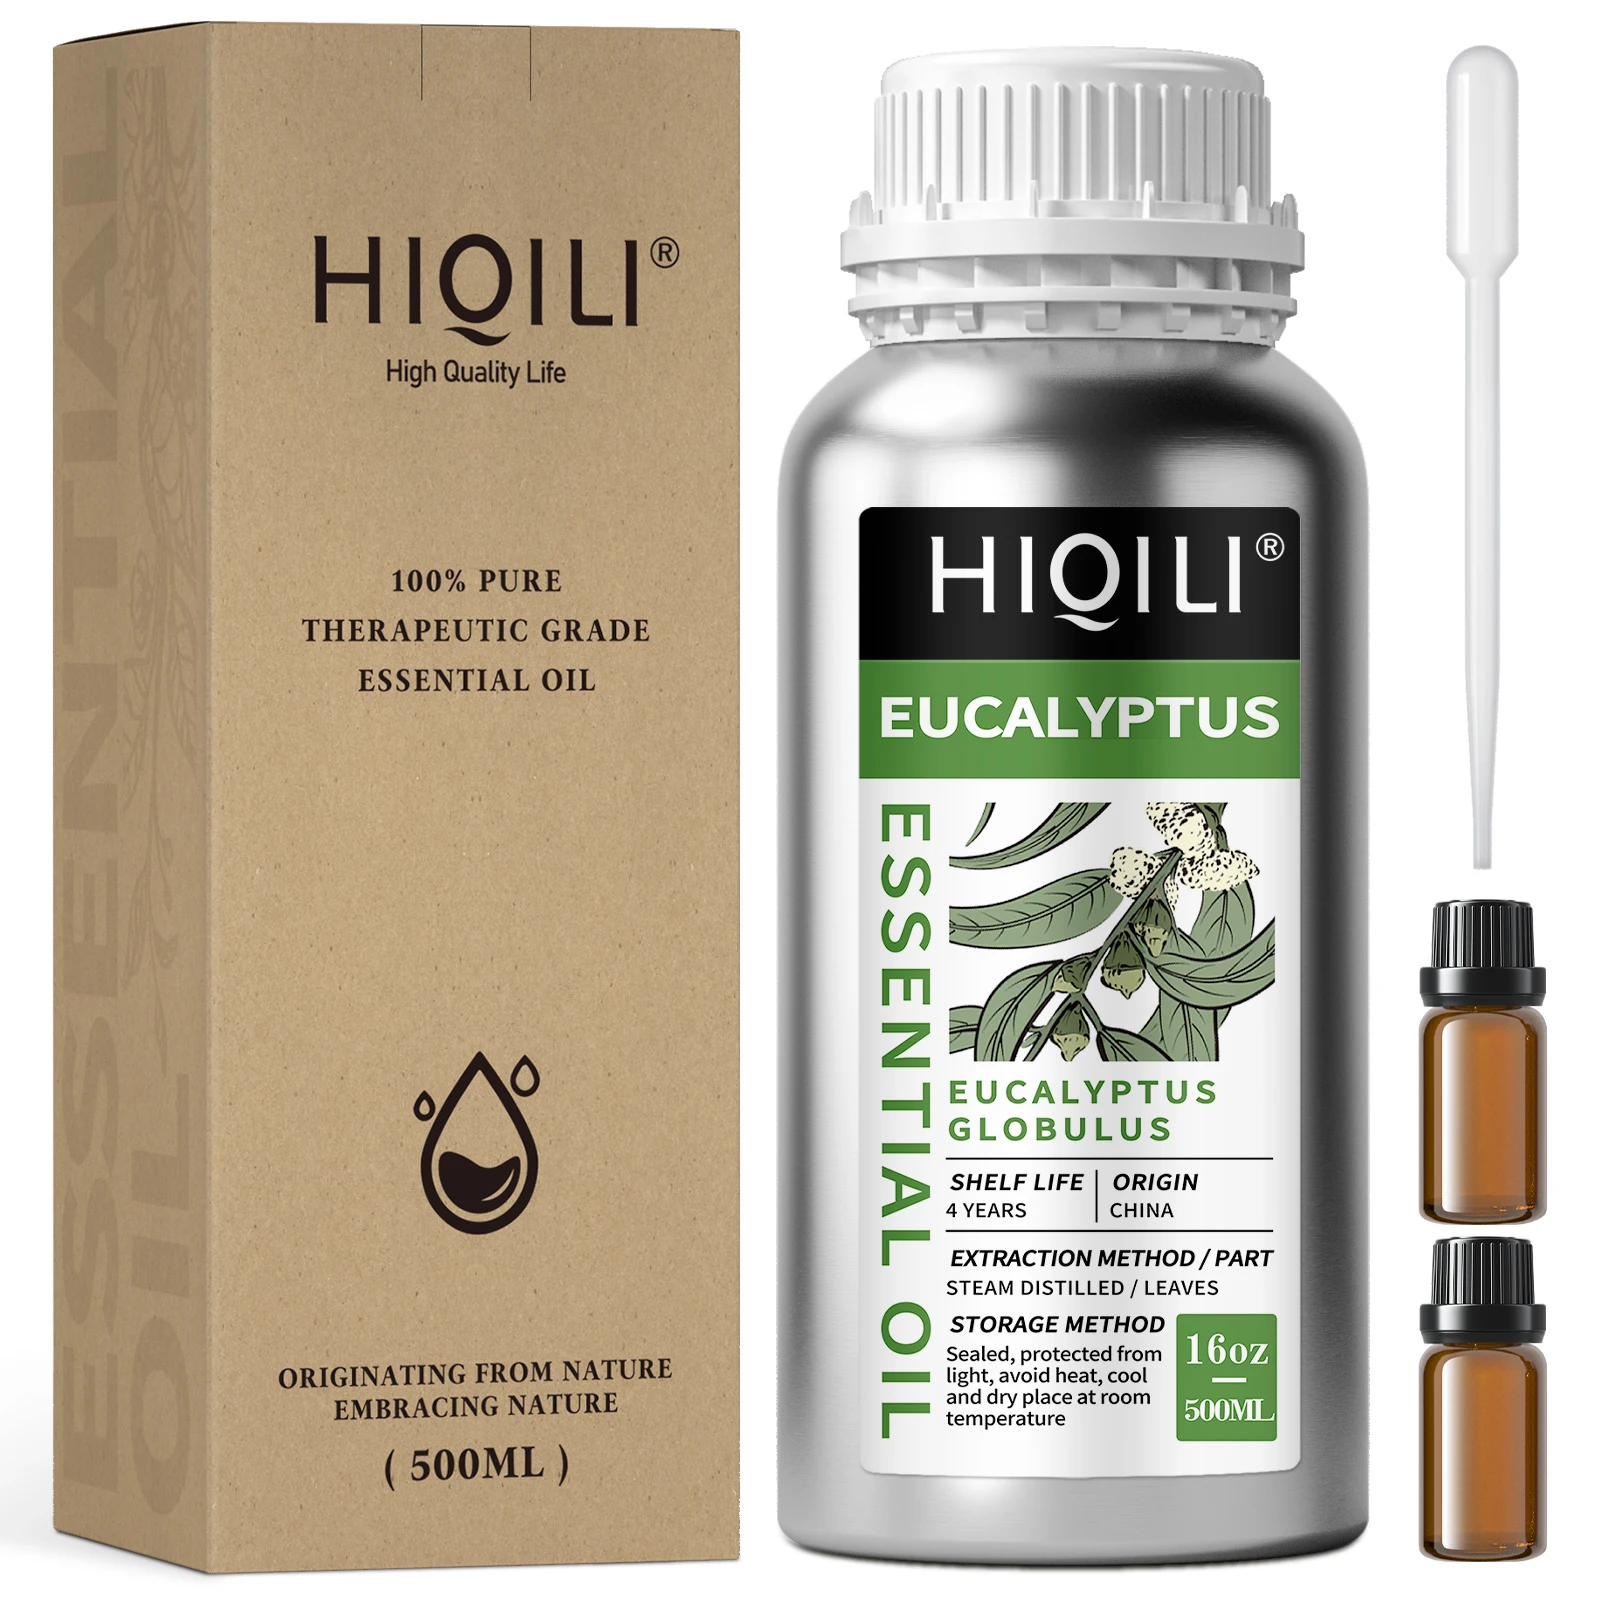 HIQILI 500ML Eucalyptus Essential Oils, 100% Pure Nature for Aromatherapy Used for Diffuser, Humidifier, Massage | Prevent Colds manufacturer 100% organic pure essential oil oem odm natural aromatherapy 500ml sandalwood fragrance essential oils for diffuser